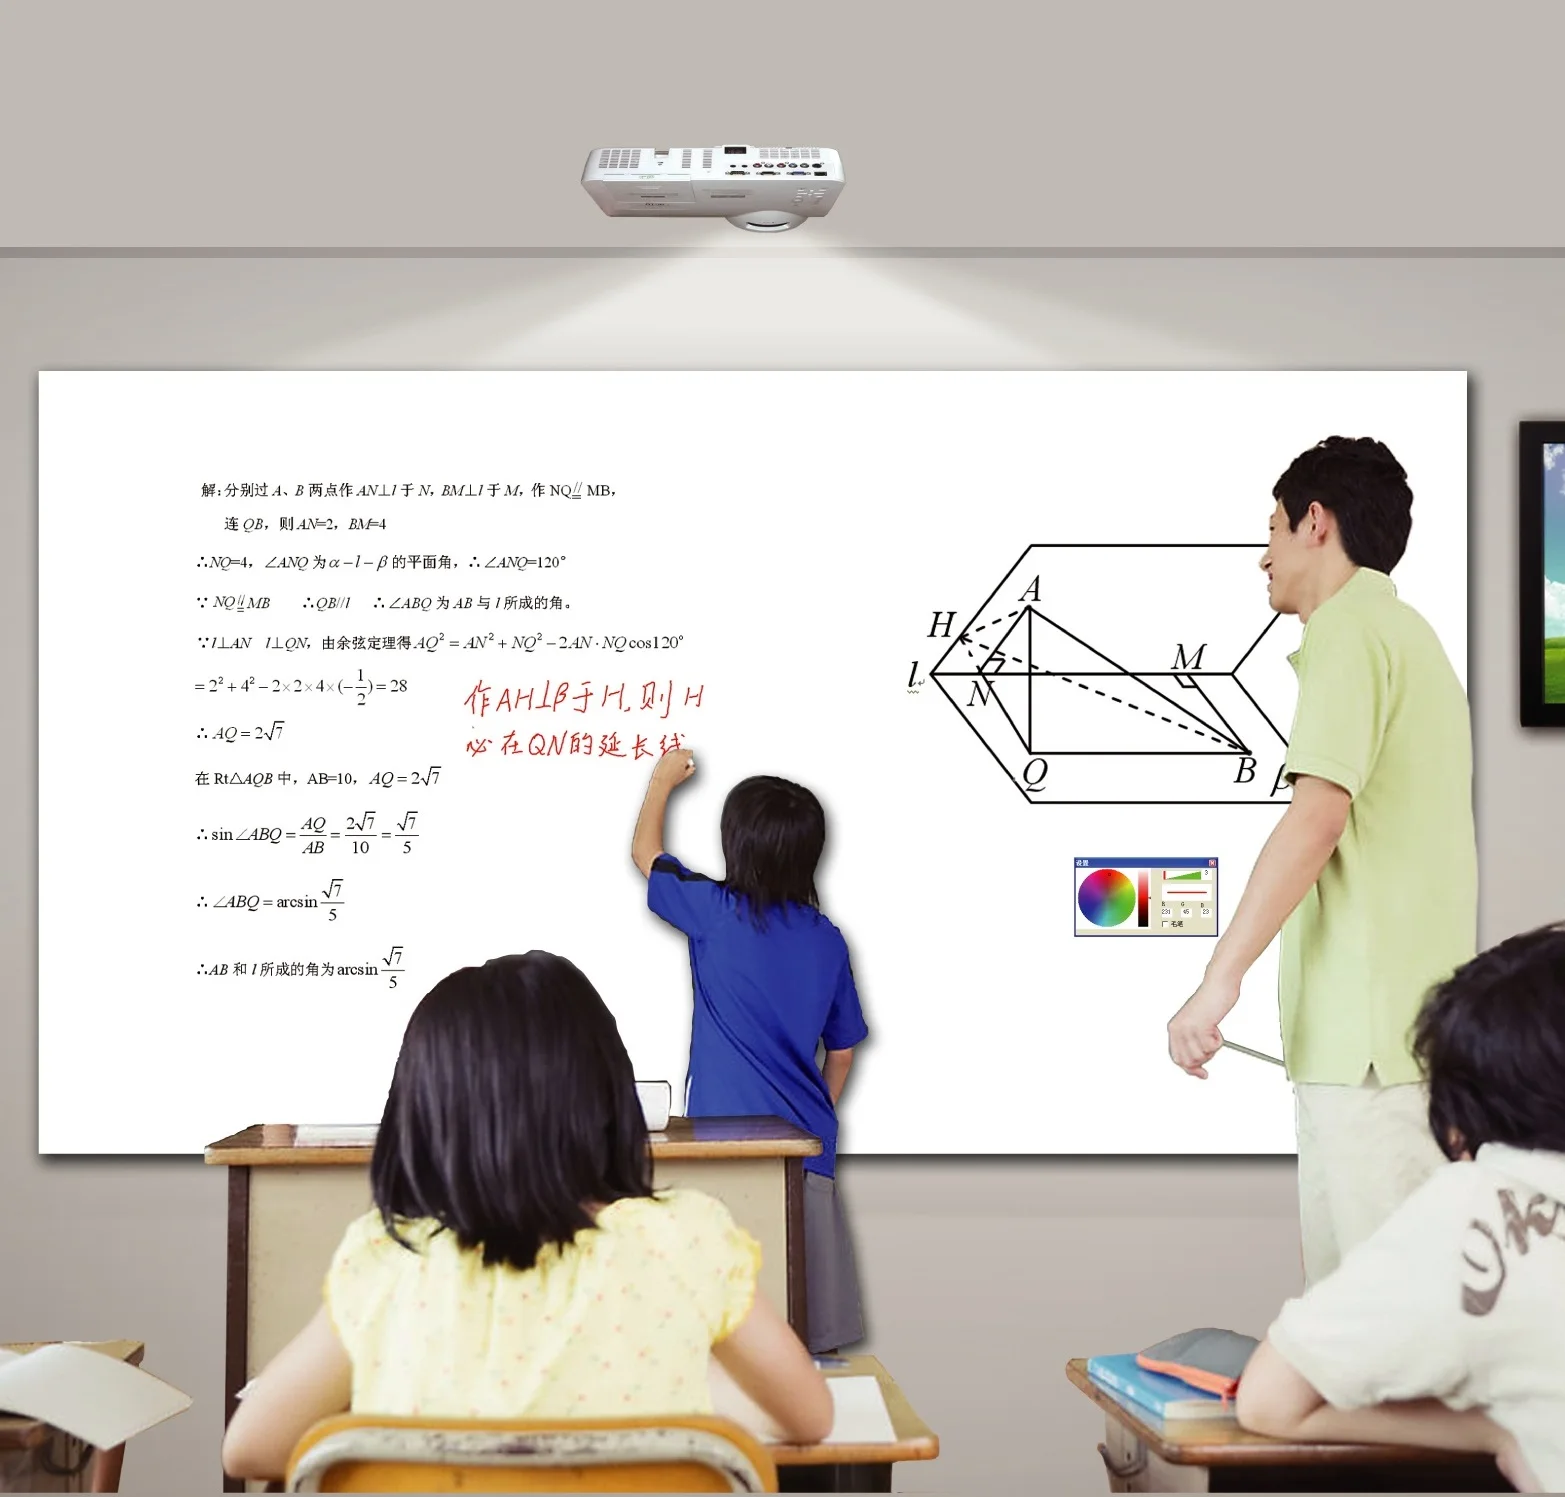 Interactive Whiteboard WB3100 Real Multi Pen Touch Mini Virtual Camera Smart Board for Teaching Shool Children Education Office